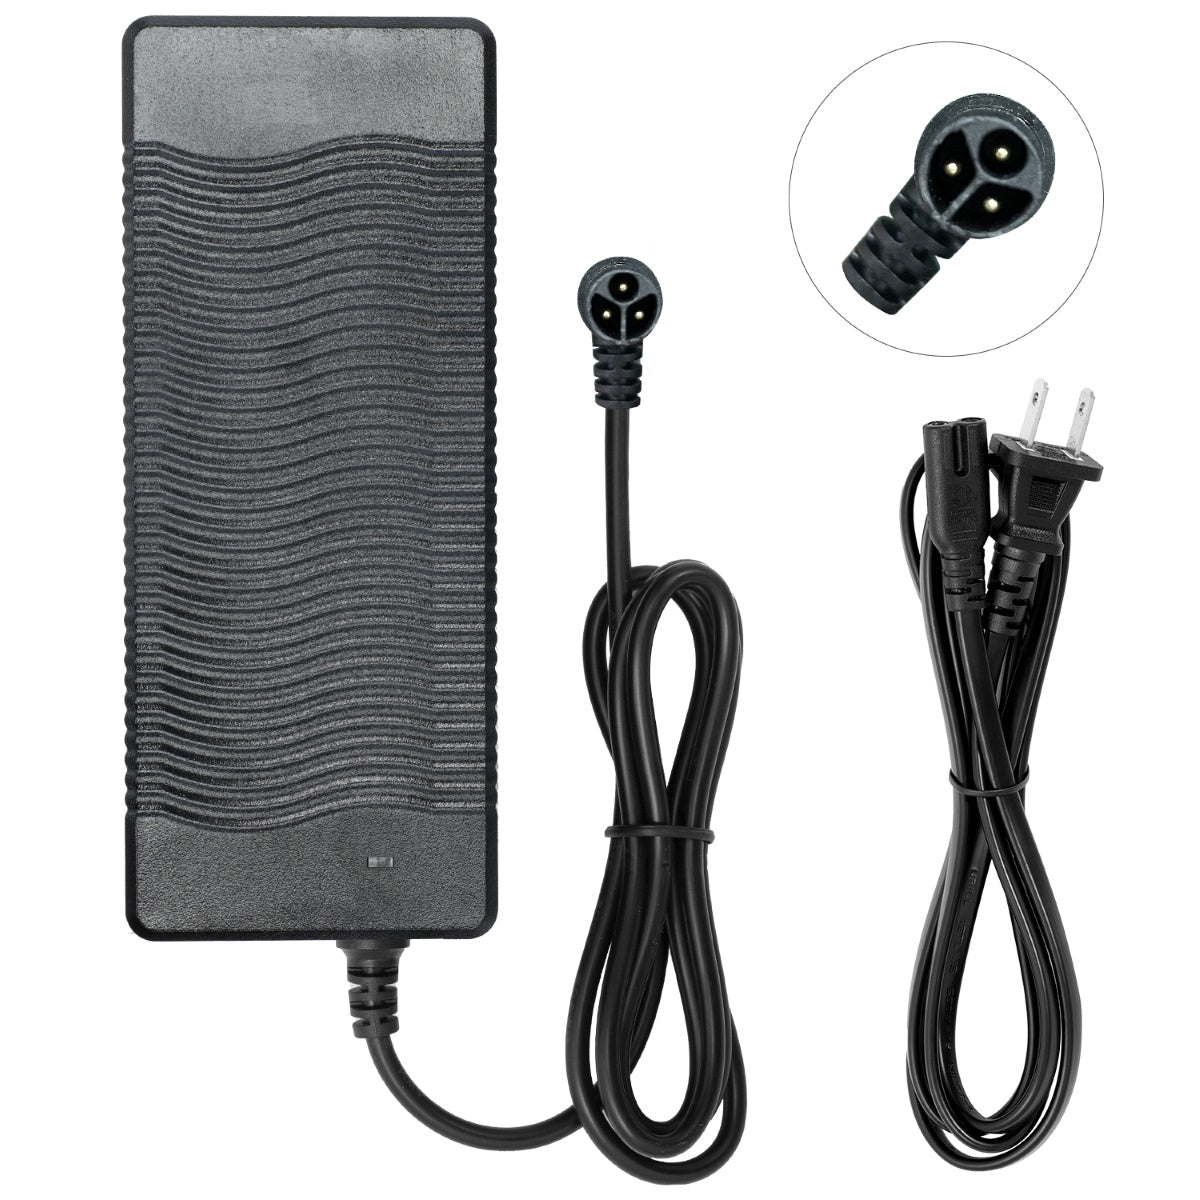 Charger for Ducati E-Bike